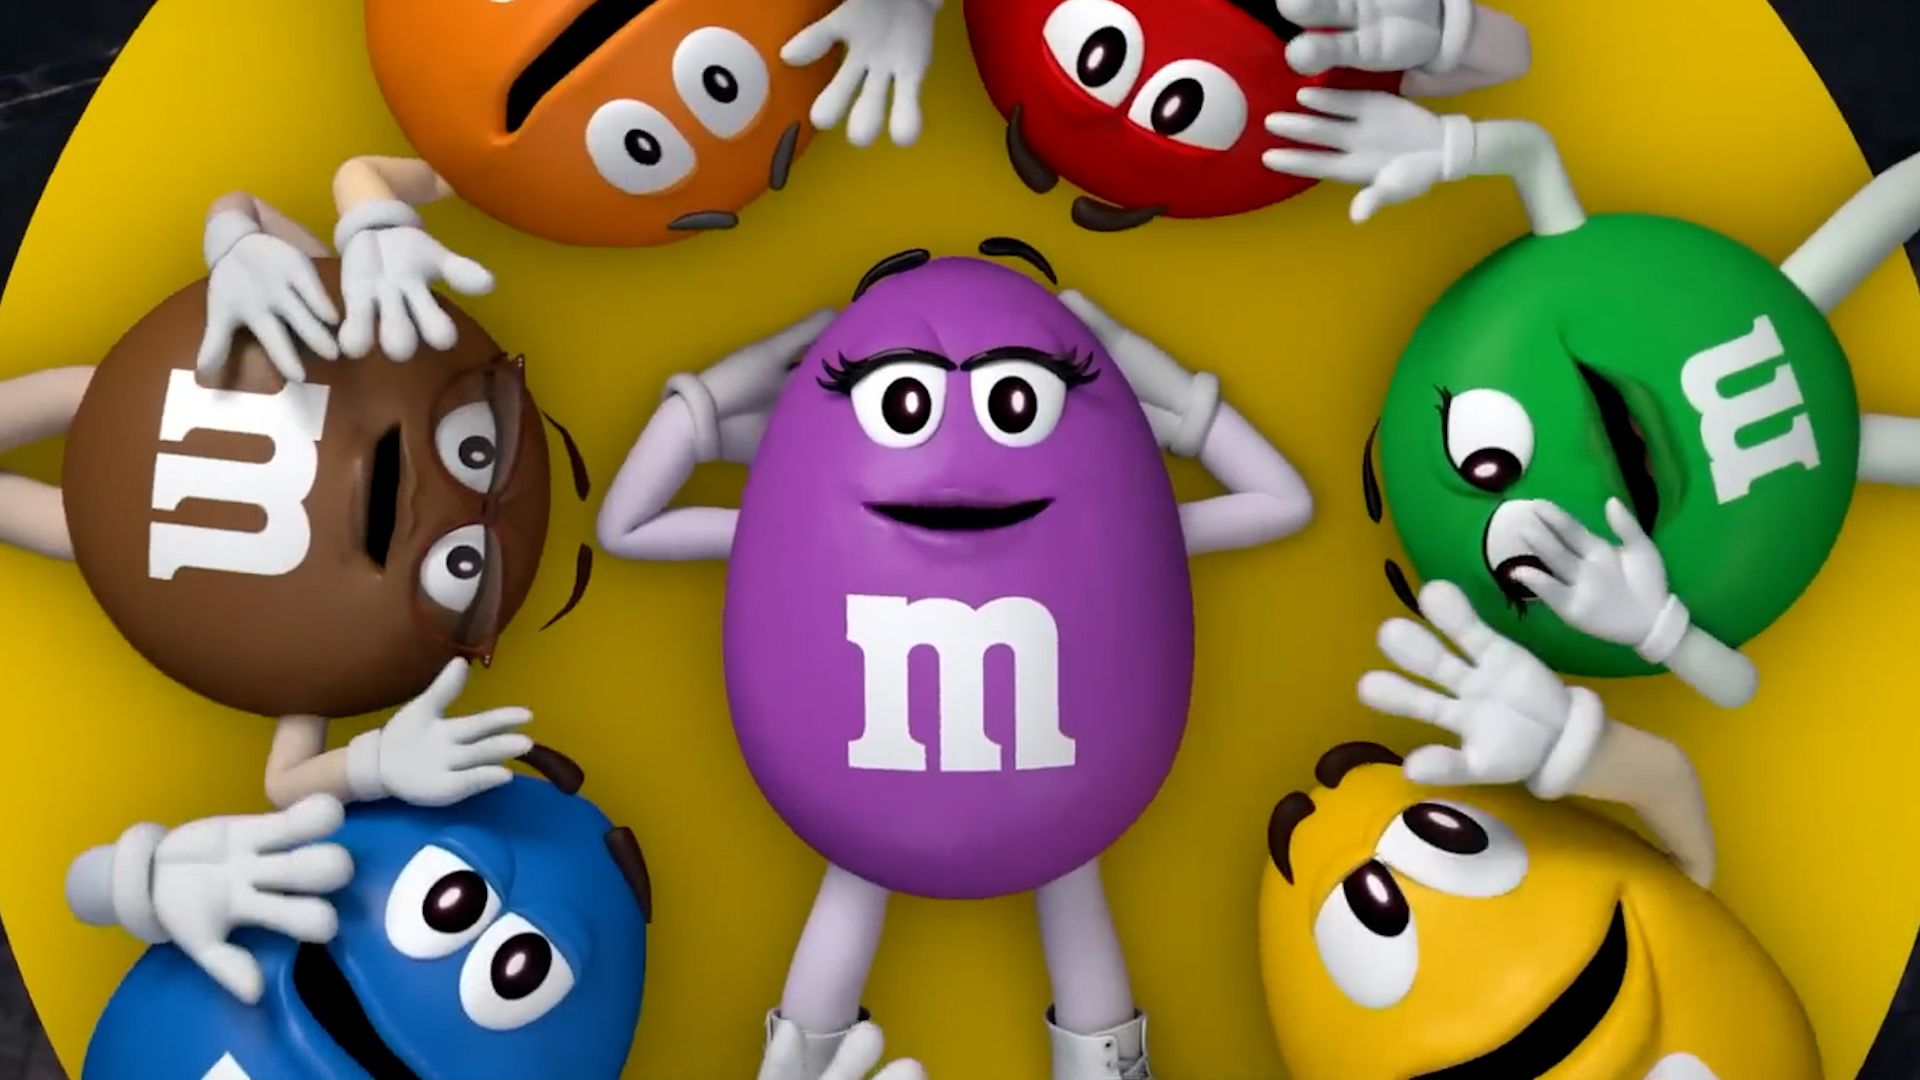 Hear conservative complaints about changes to M&M'S chocolate